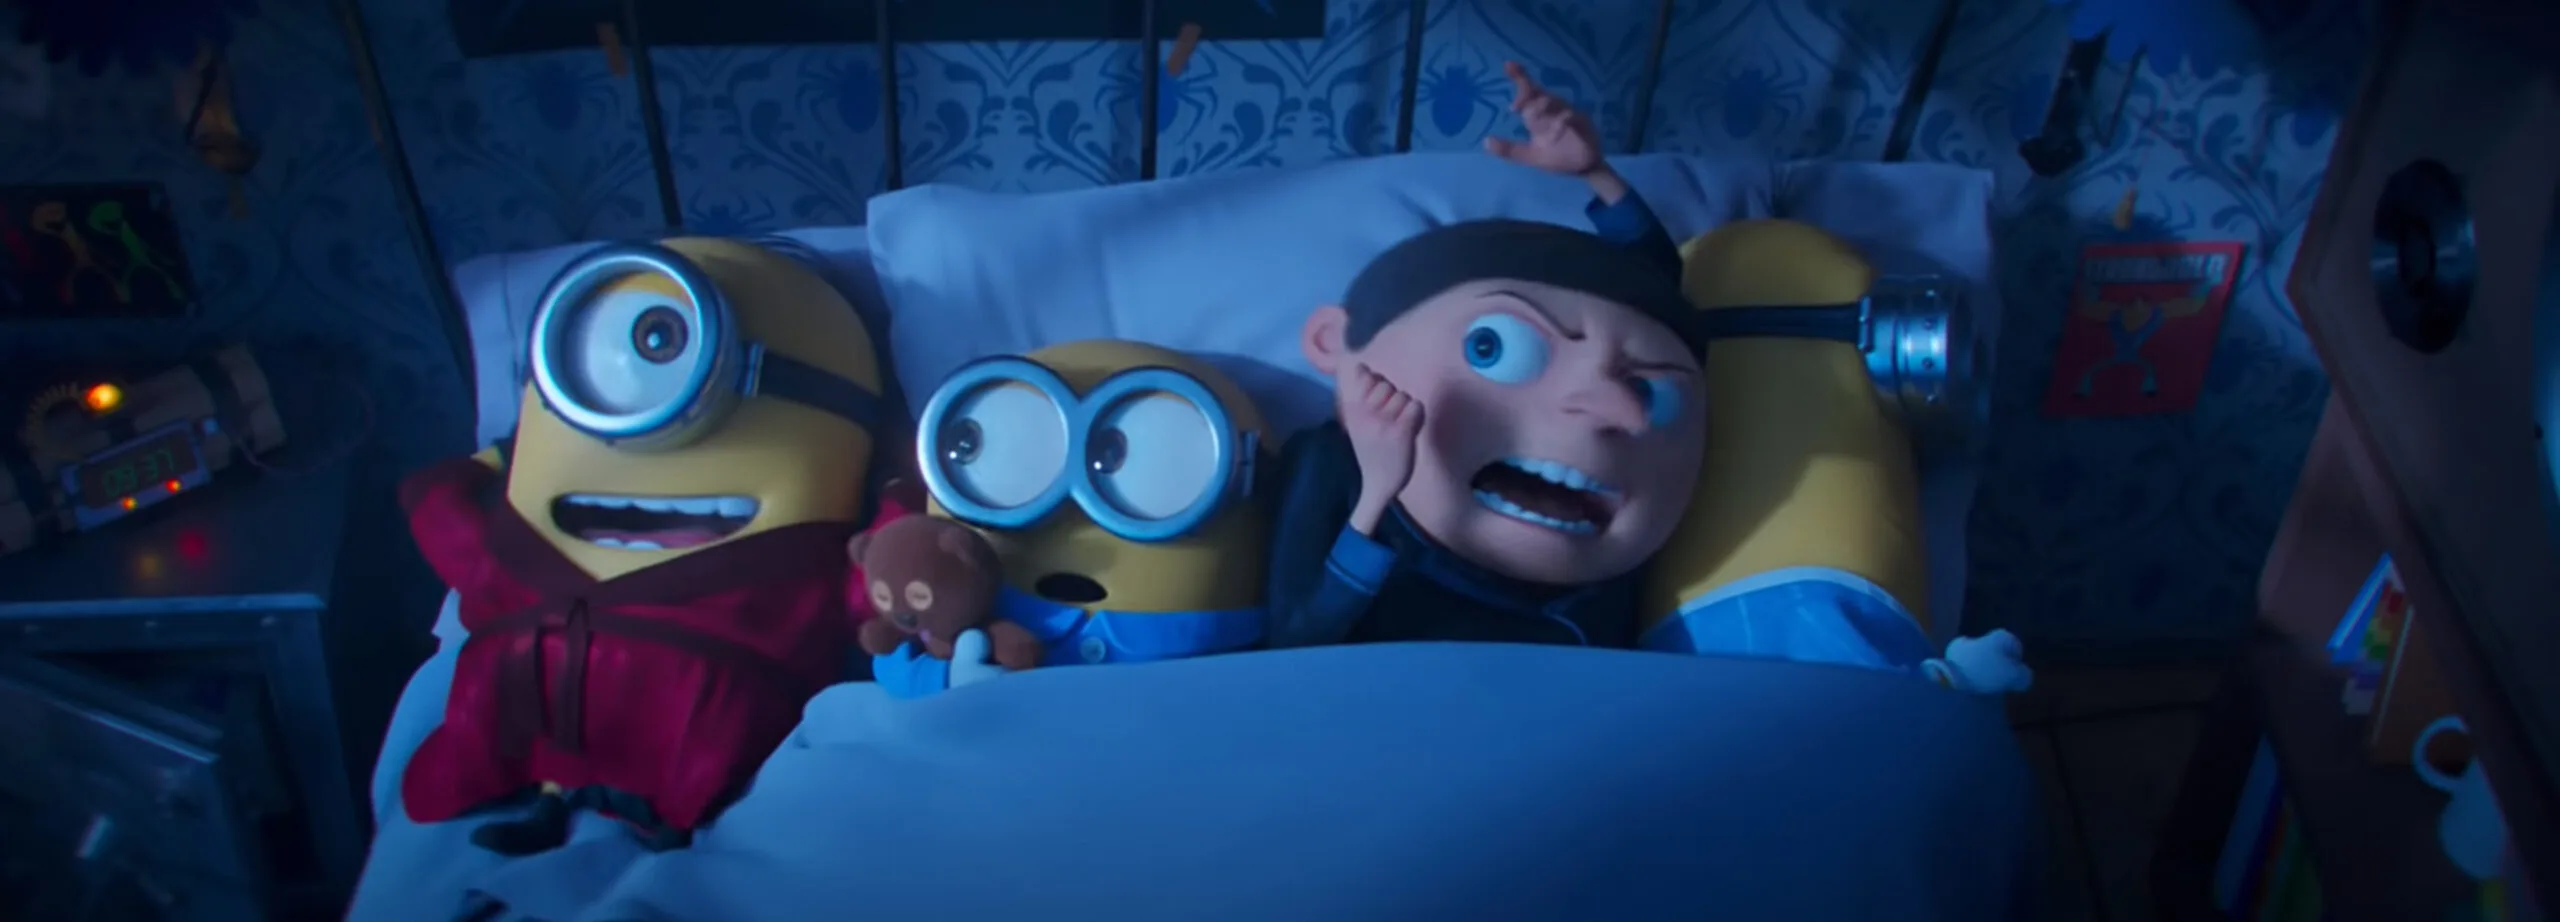 Minion quotes from The Rise of Gru. 3 minions and gru in a bed in the dark. 